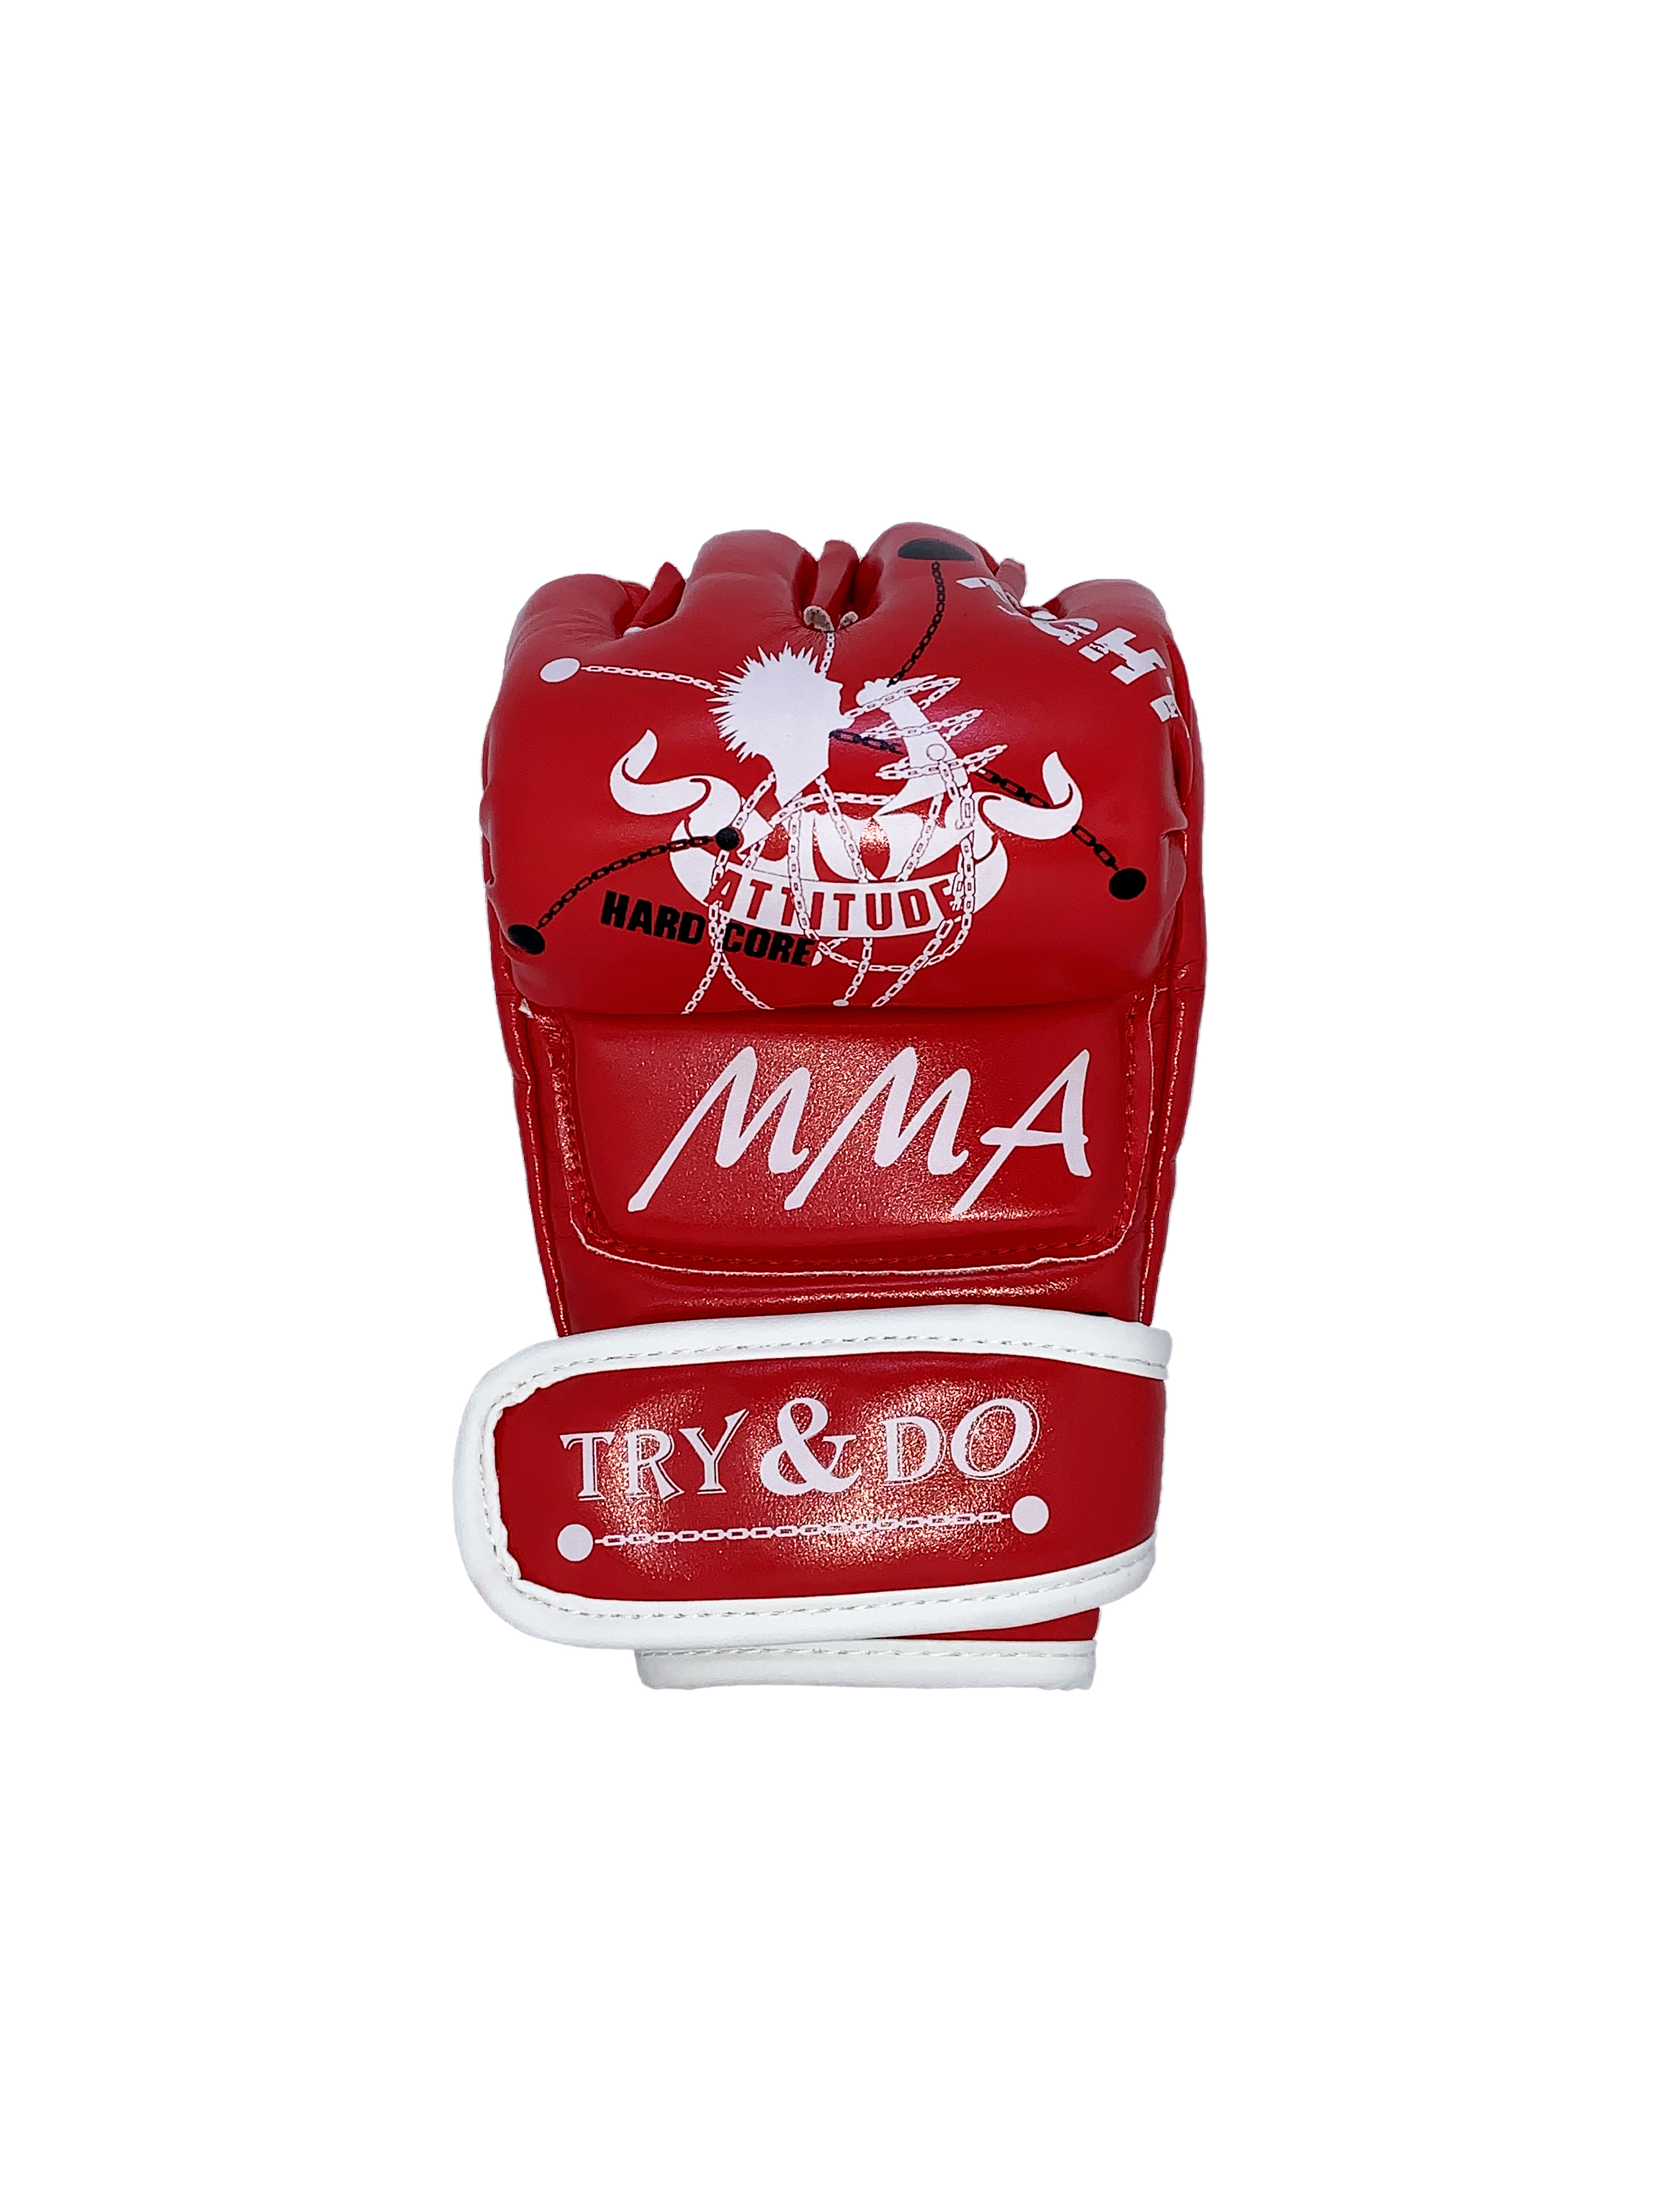 Guantes Try & Do Artes Marciales Mma Muay Thai Ufc Box Boxeo